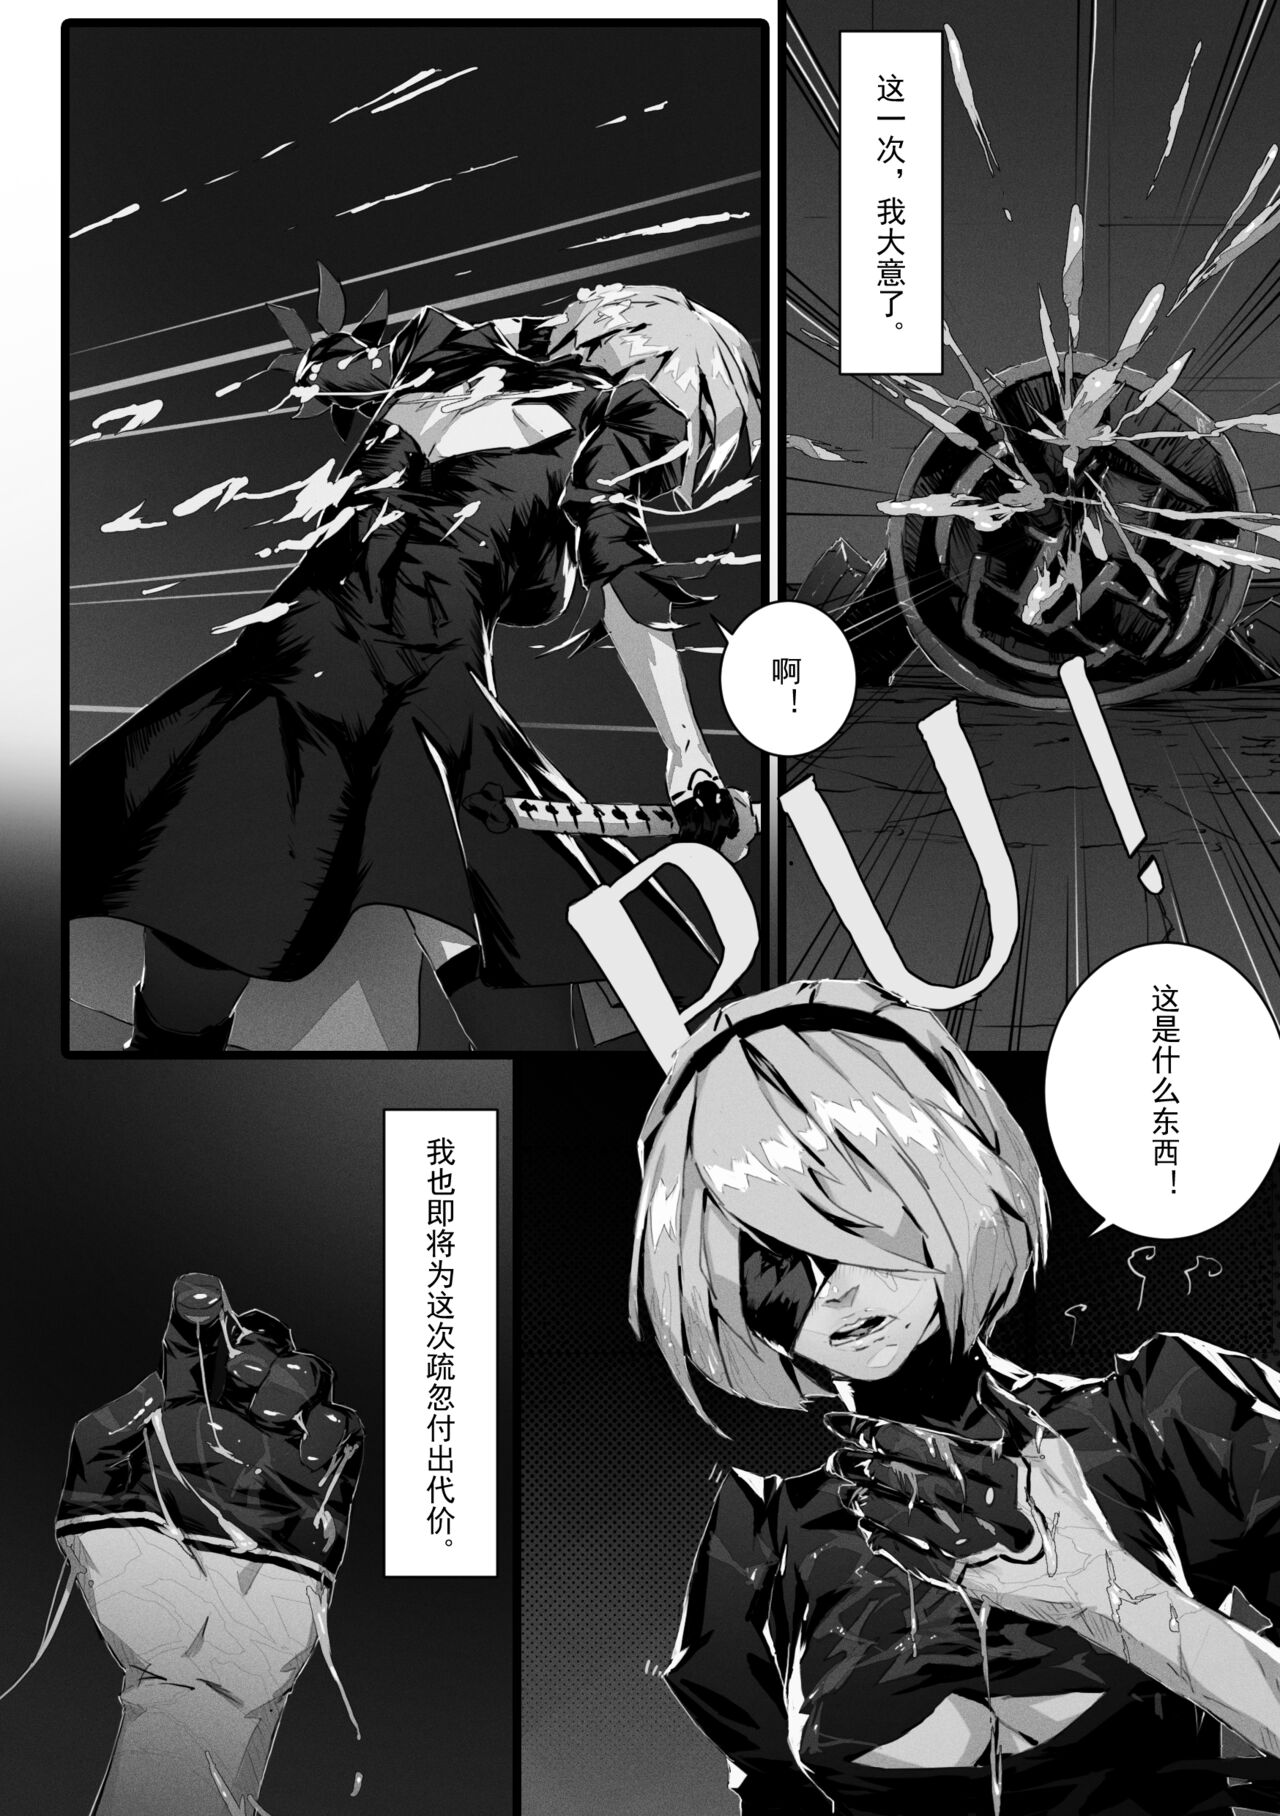 [Tyrant] 2B In Trouble Part 1-6 (NieR:Automata) 